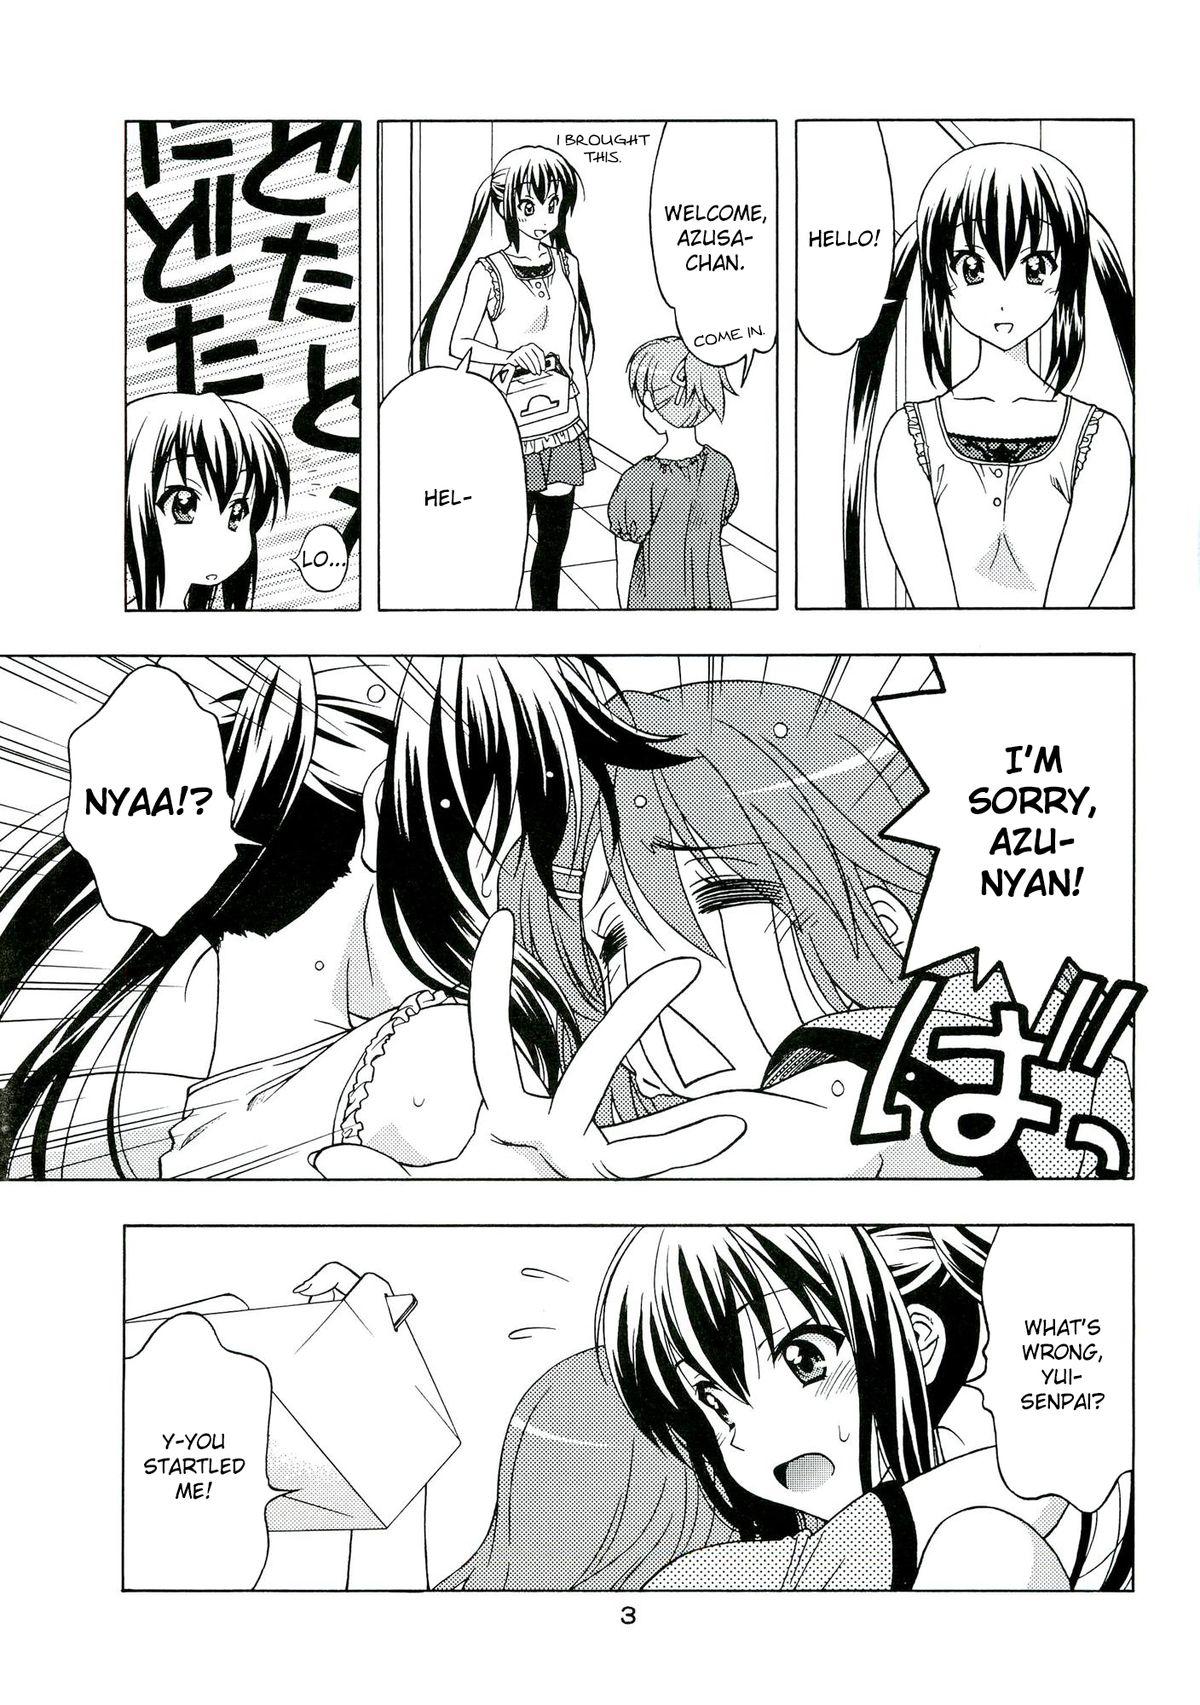 Mms K-ON! BOX 3 - K-on Butts - Page 2